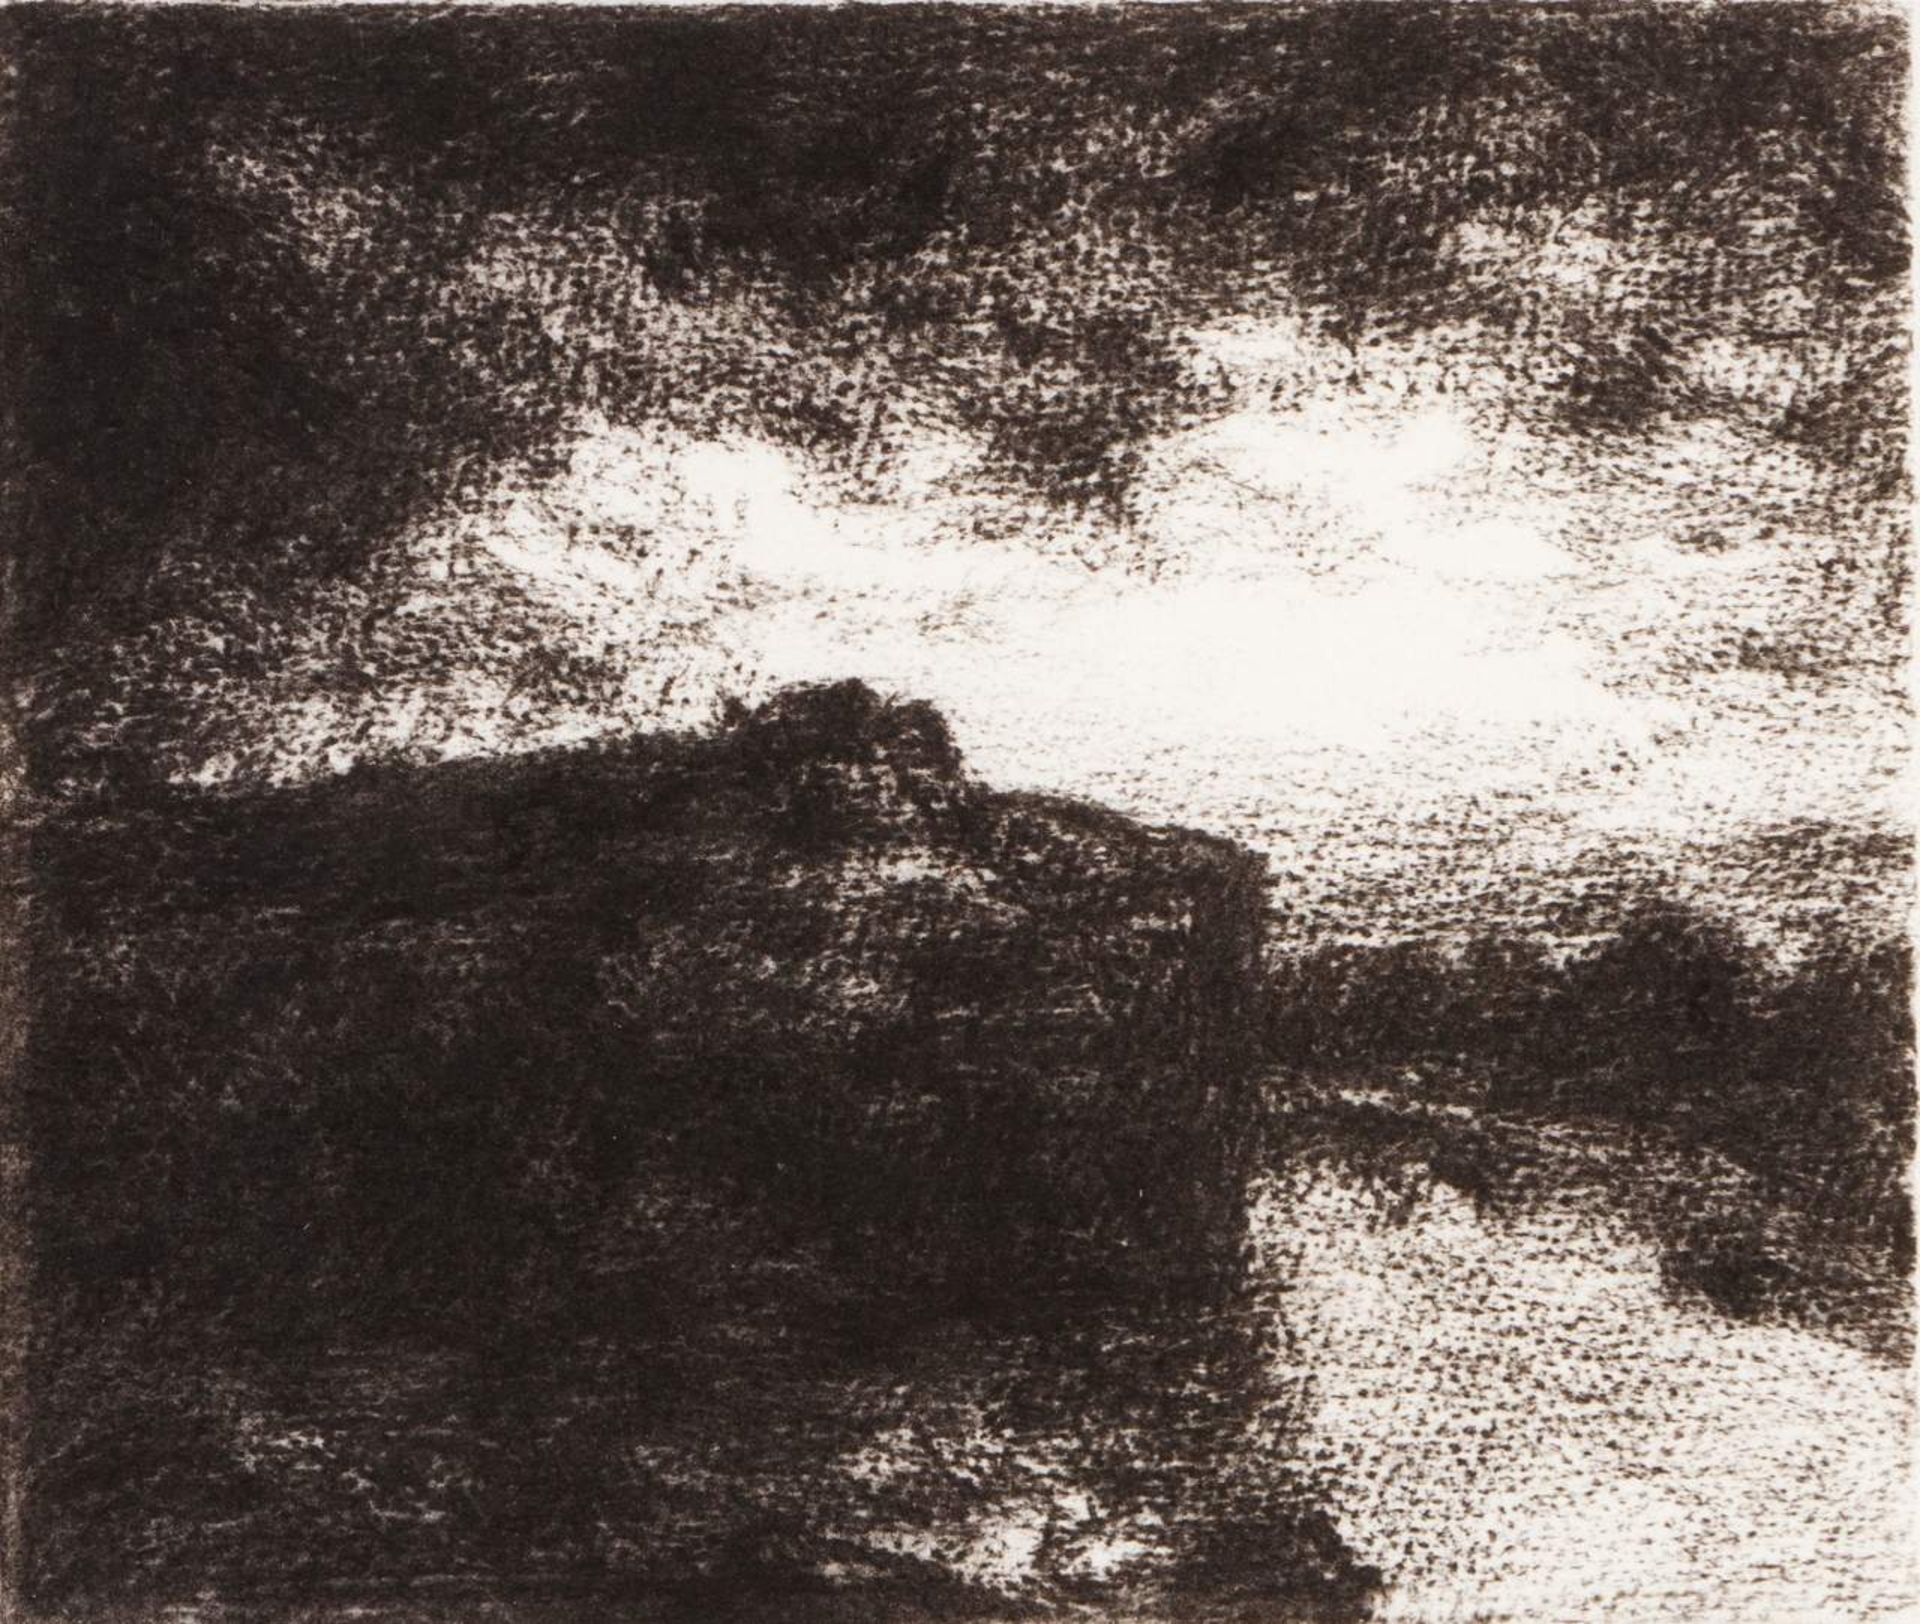 Paulo Brighenti (b.1969)
Untitled nº 15
Charcoal on paper
Signed and dated 2000
Exhibitions:
Museu